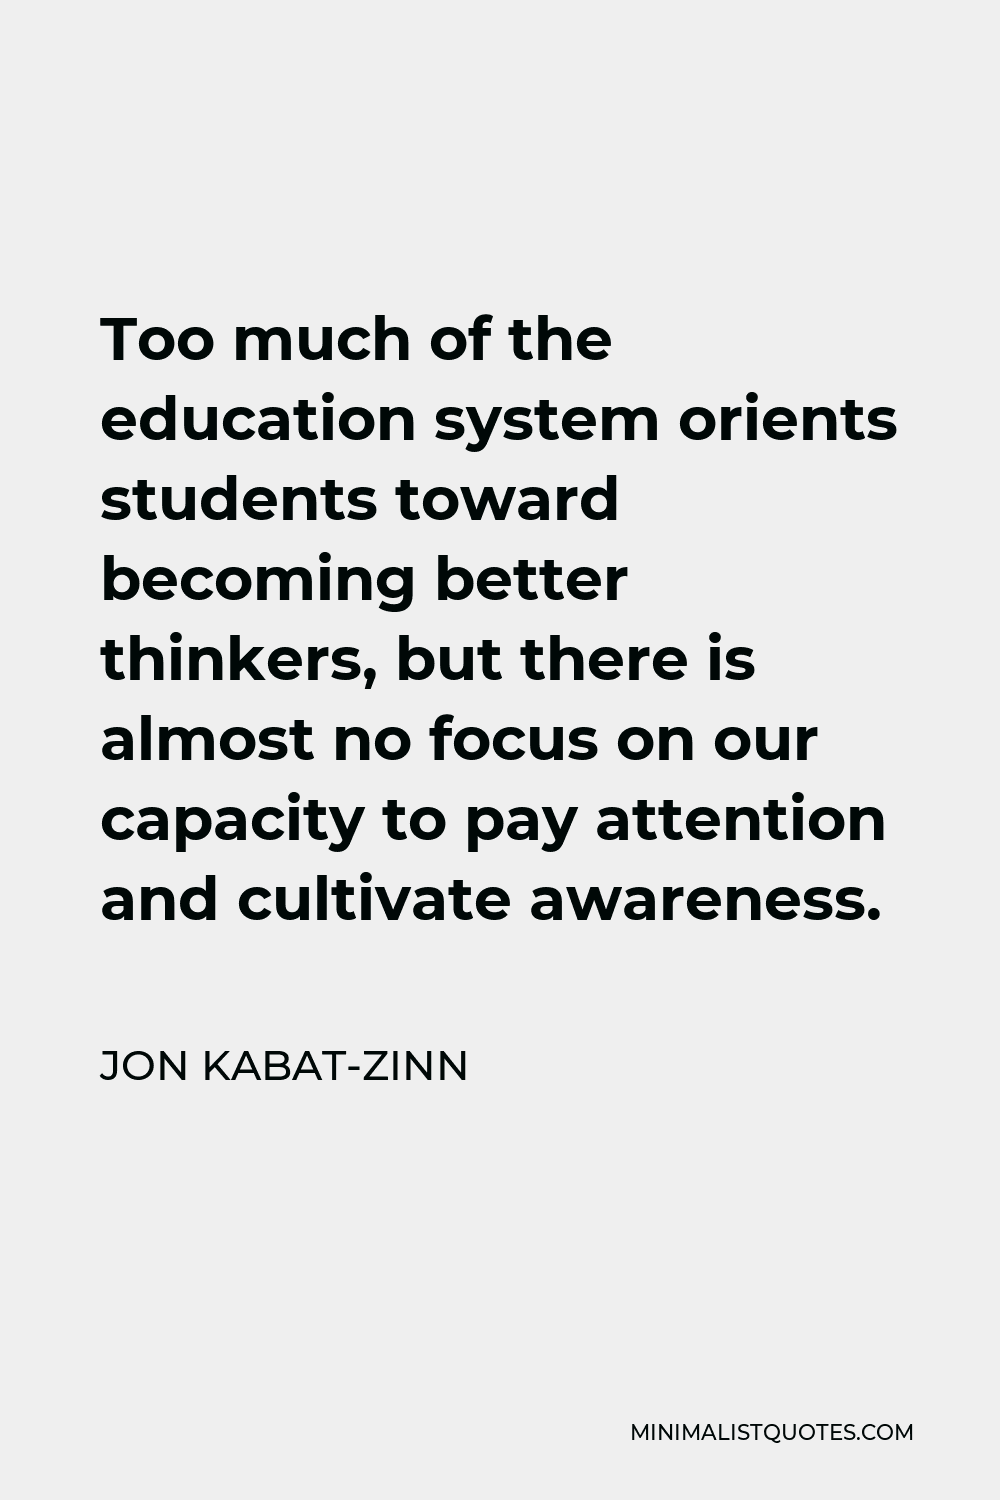 Jon Kabat-Zinn Quote - Too much of the education system orients students toward becoming better thinkers, but there is almost no focus on our capacity to pay attention and cultivate awareness.